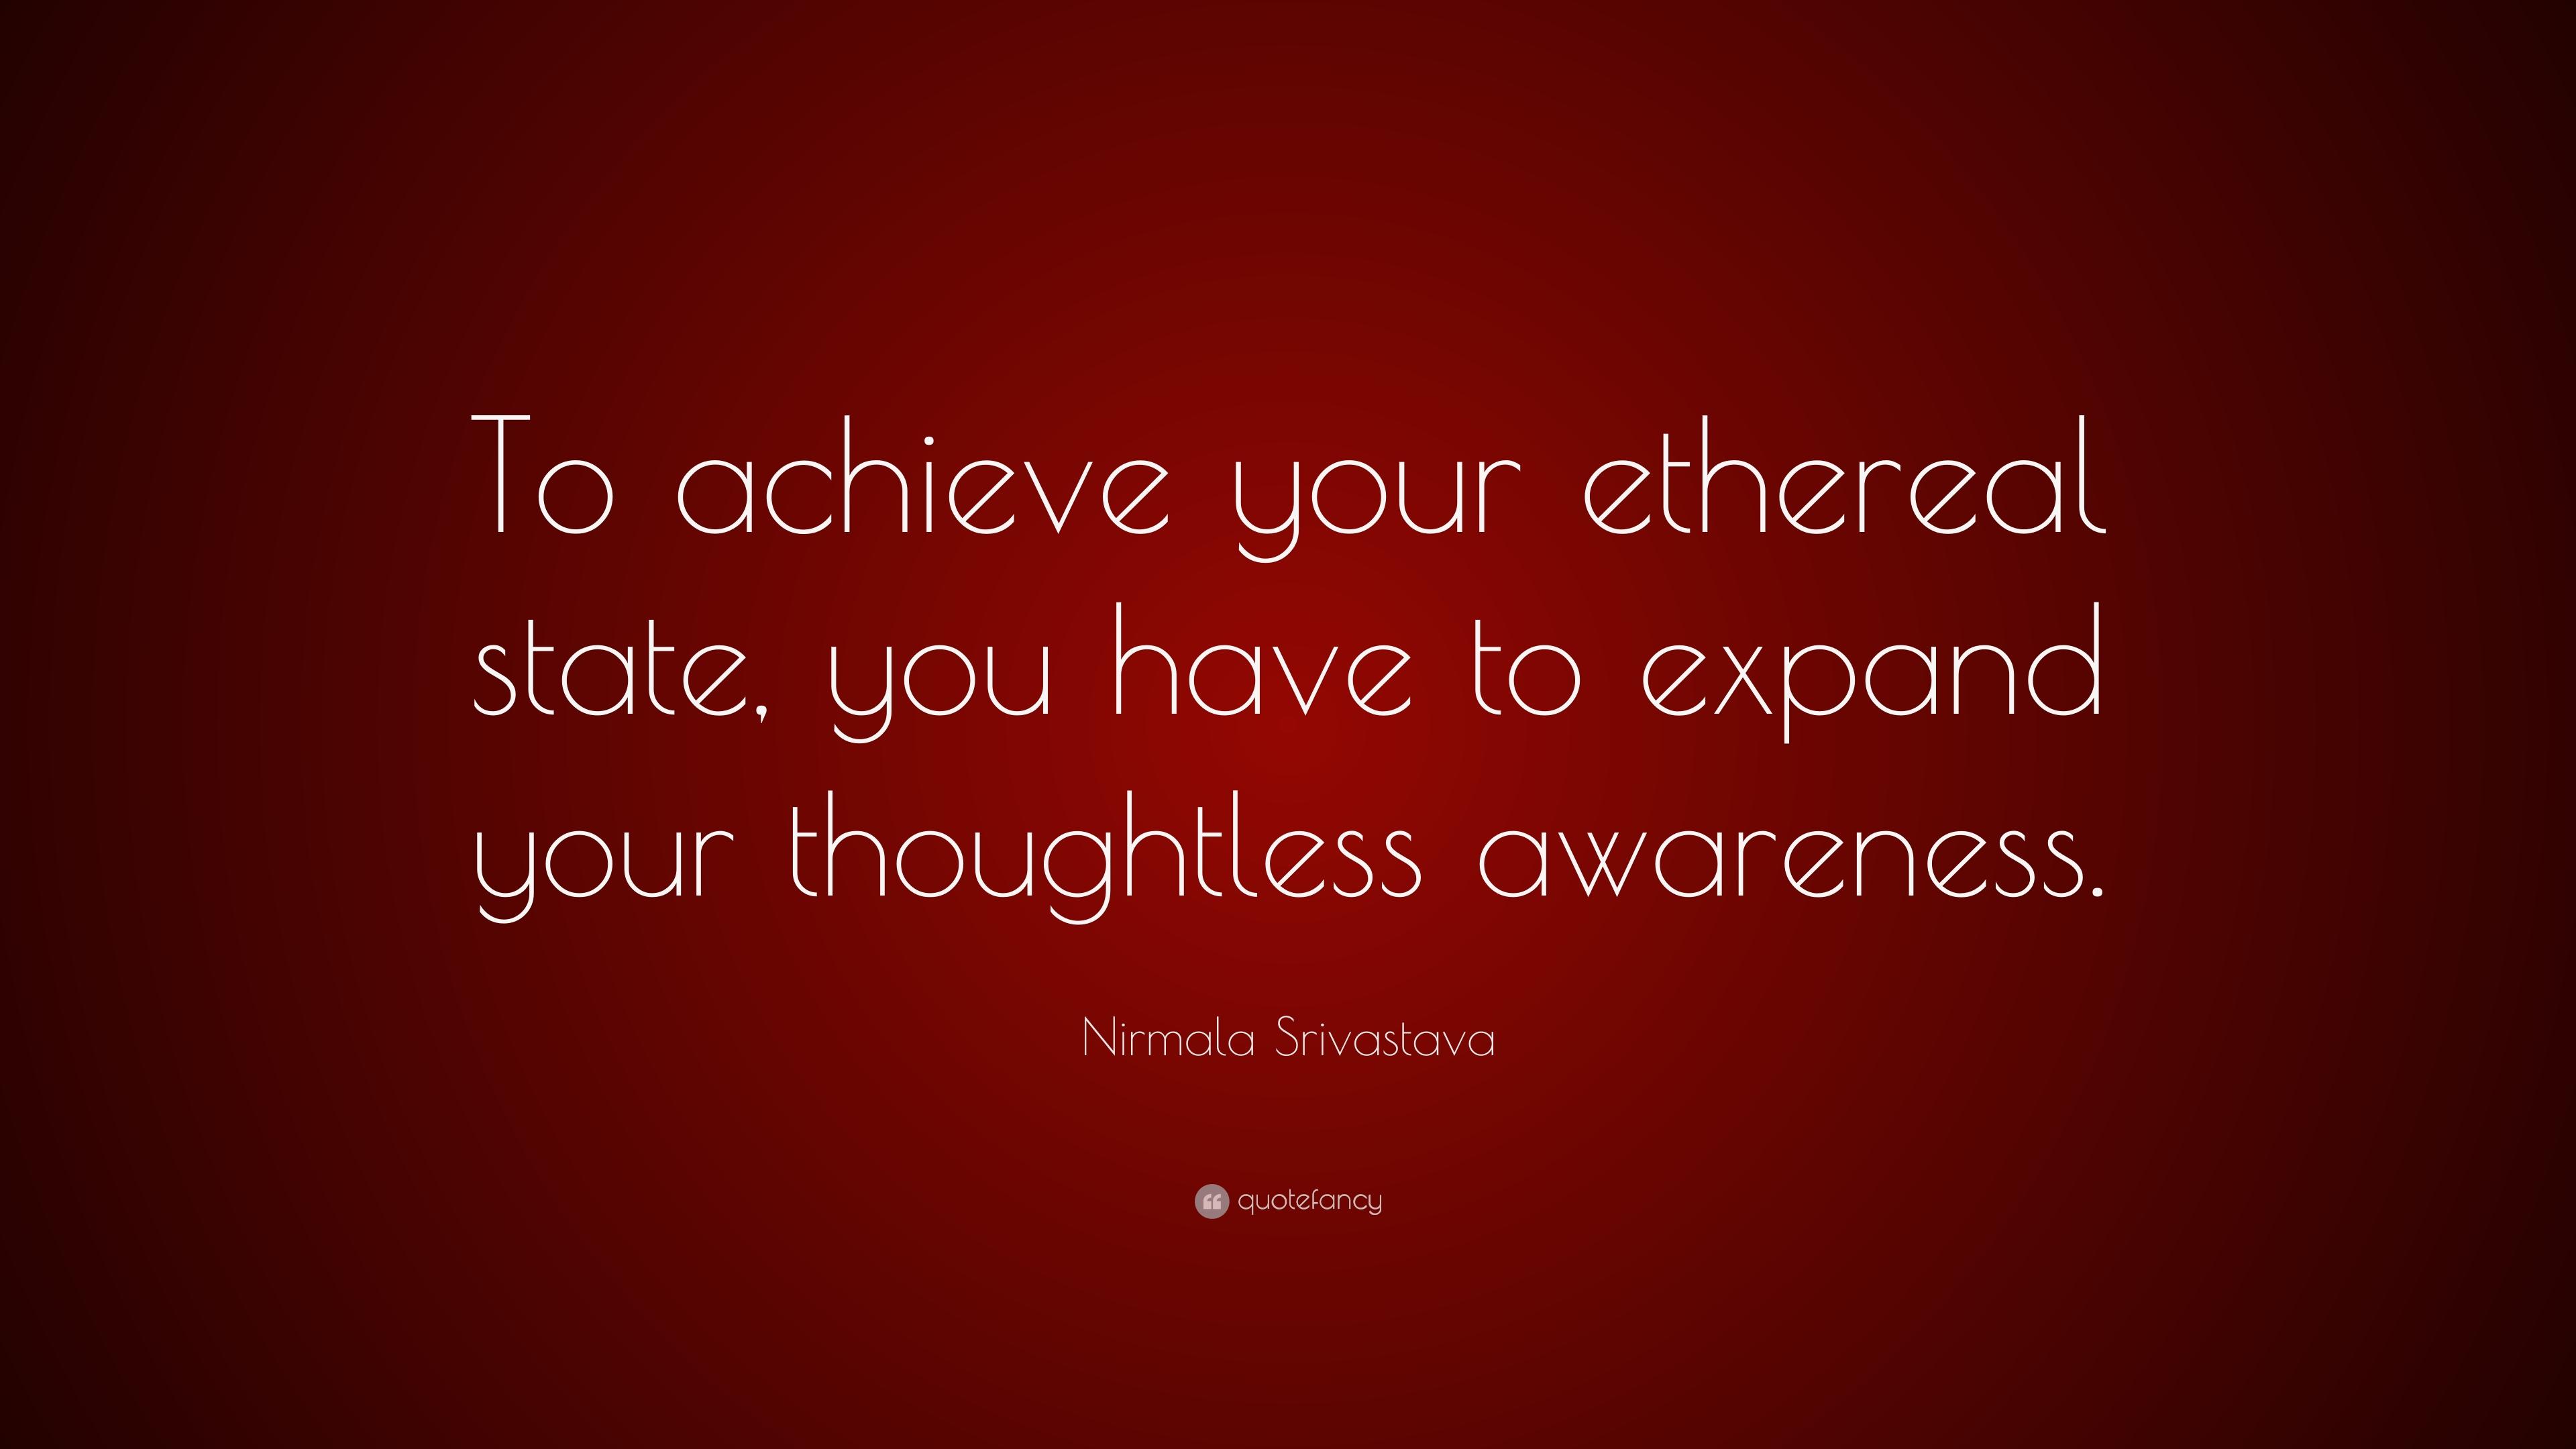 Nirmala Srivastava Quote: “To achieve your ethereal state, you have